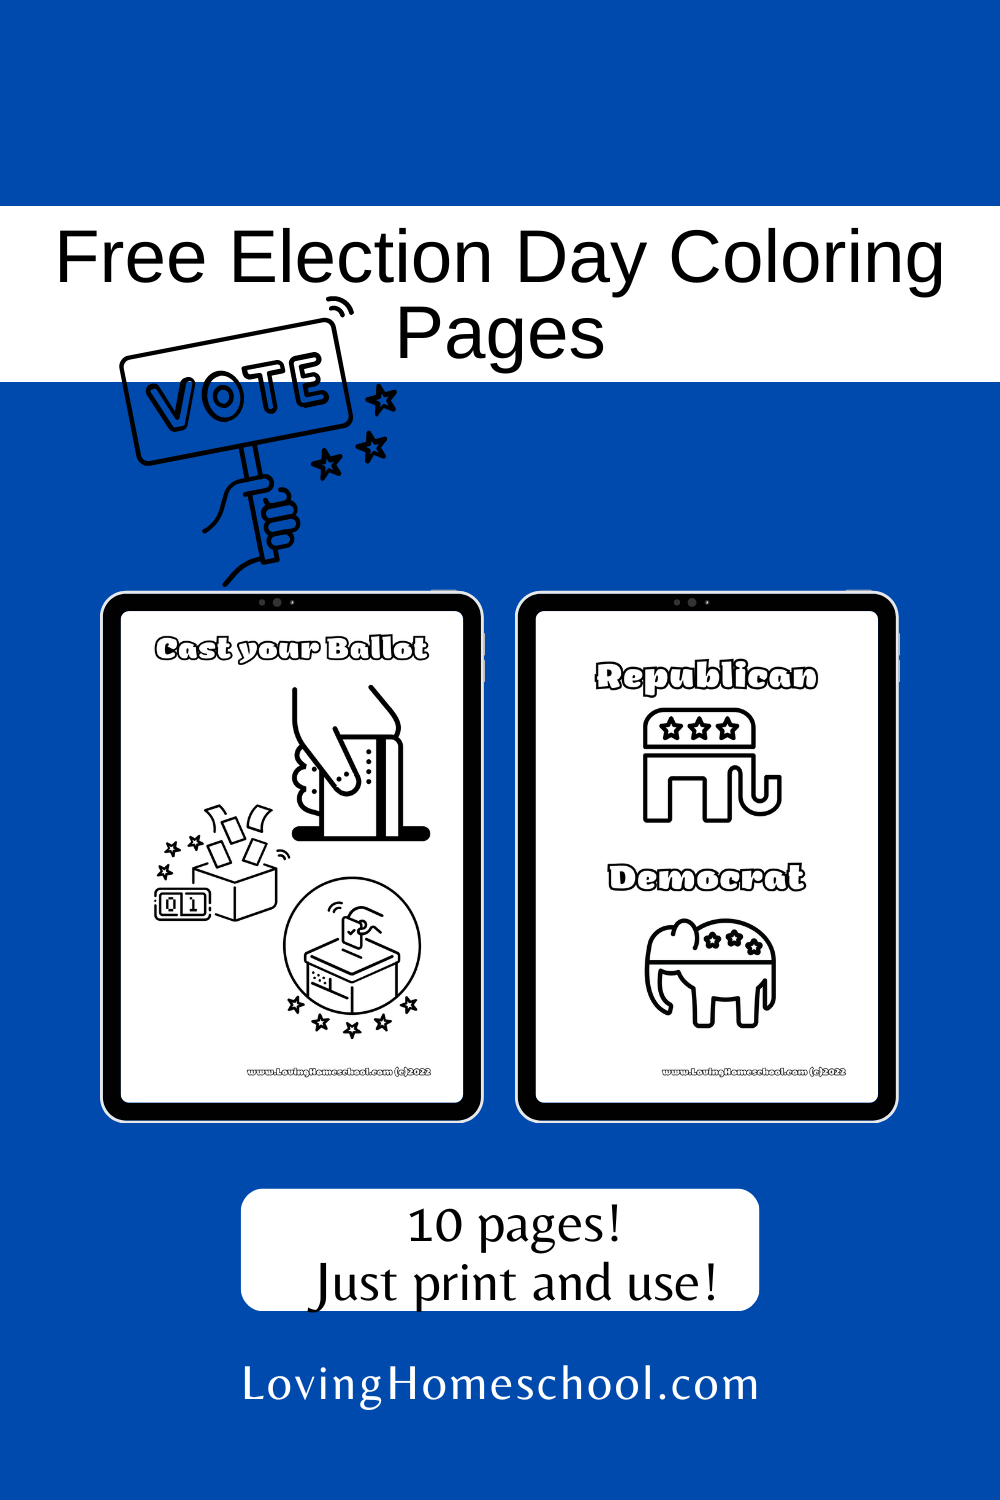 election-day-coloring-pages-lovinghomeschool